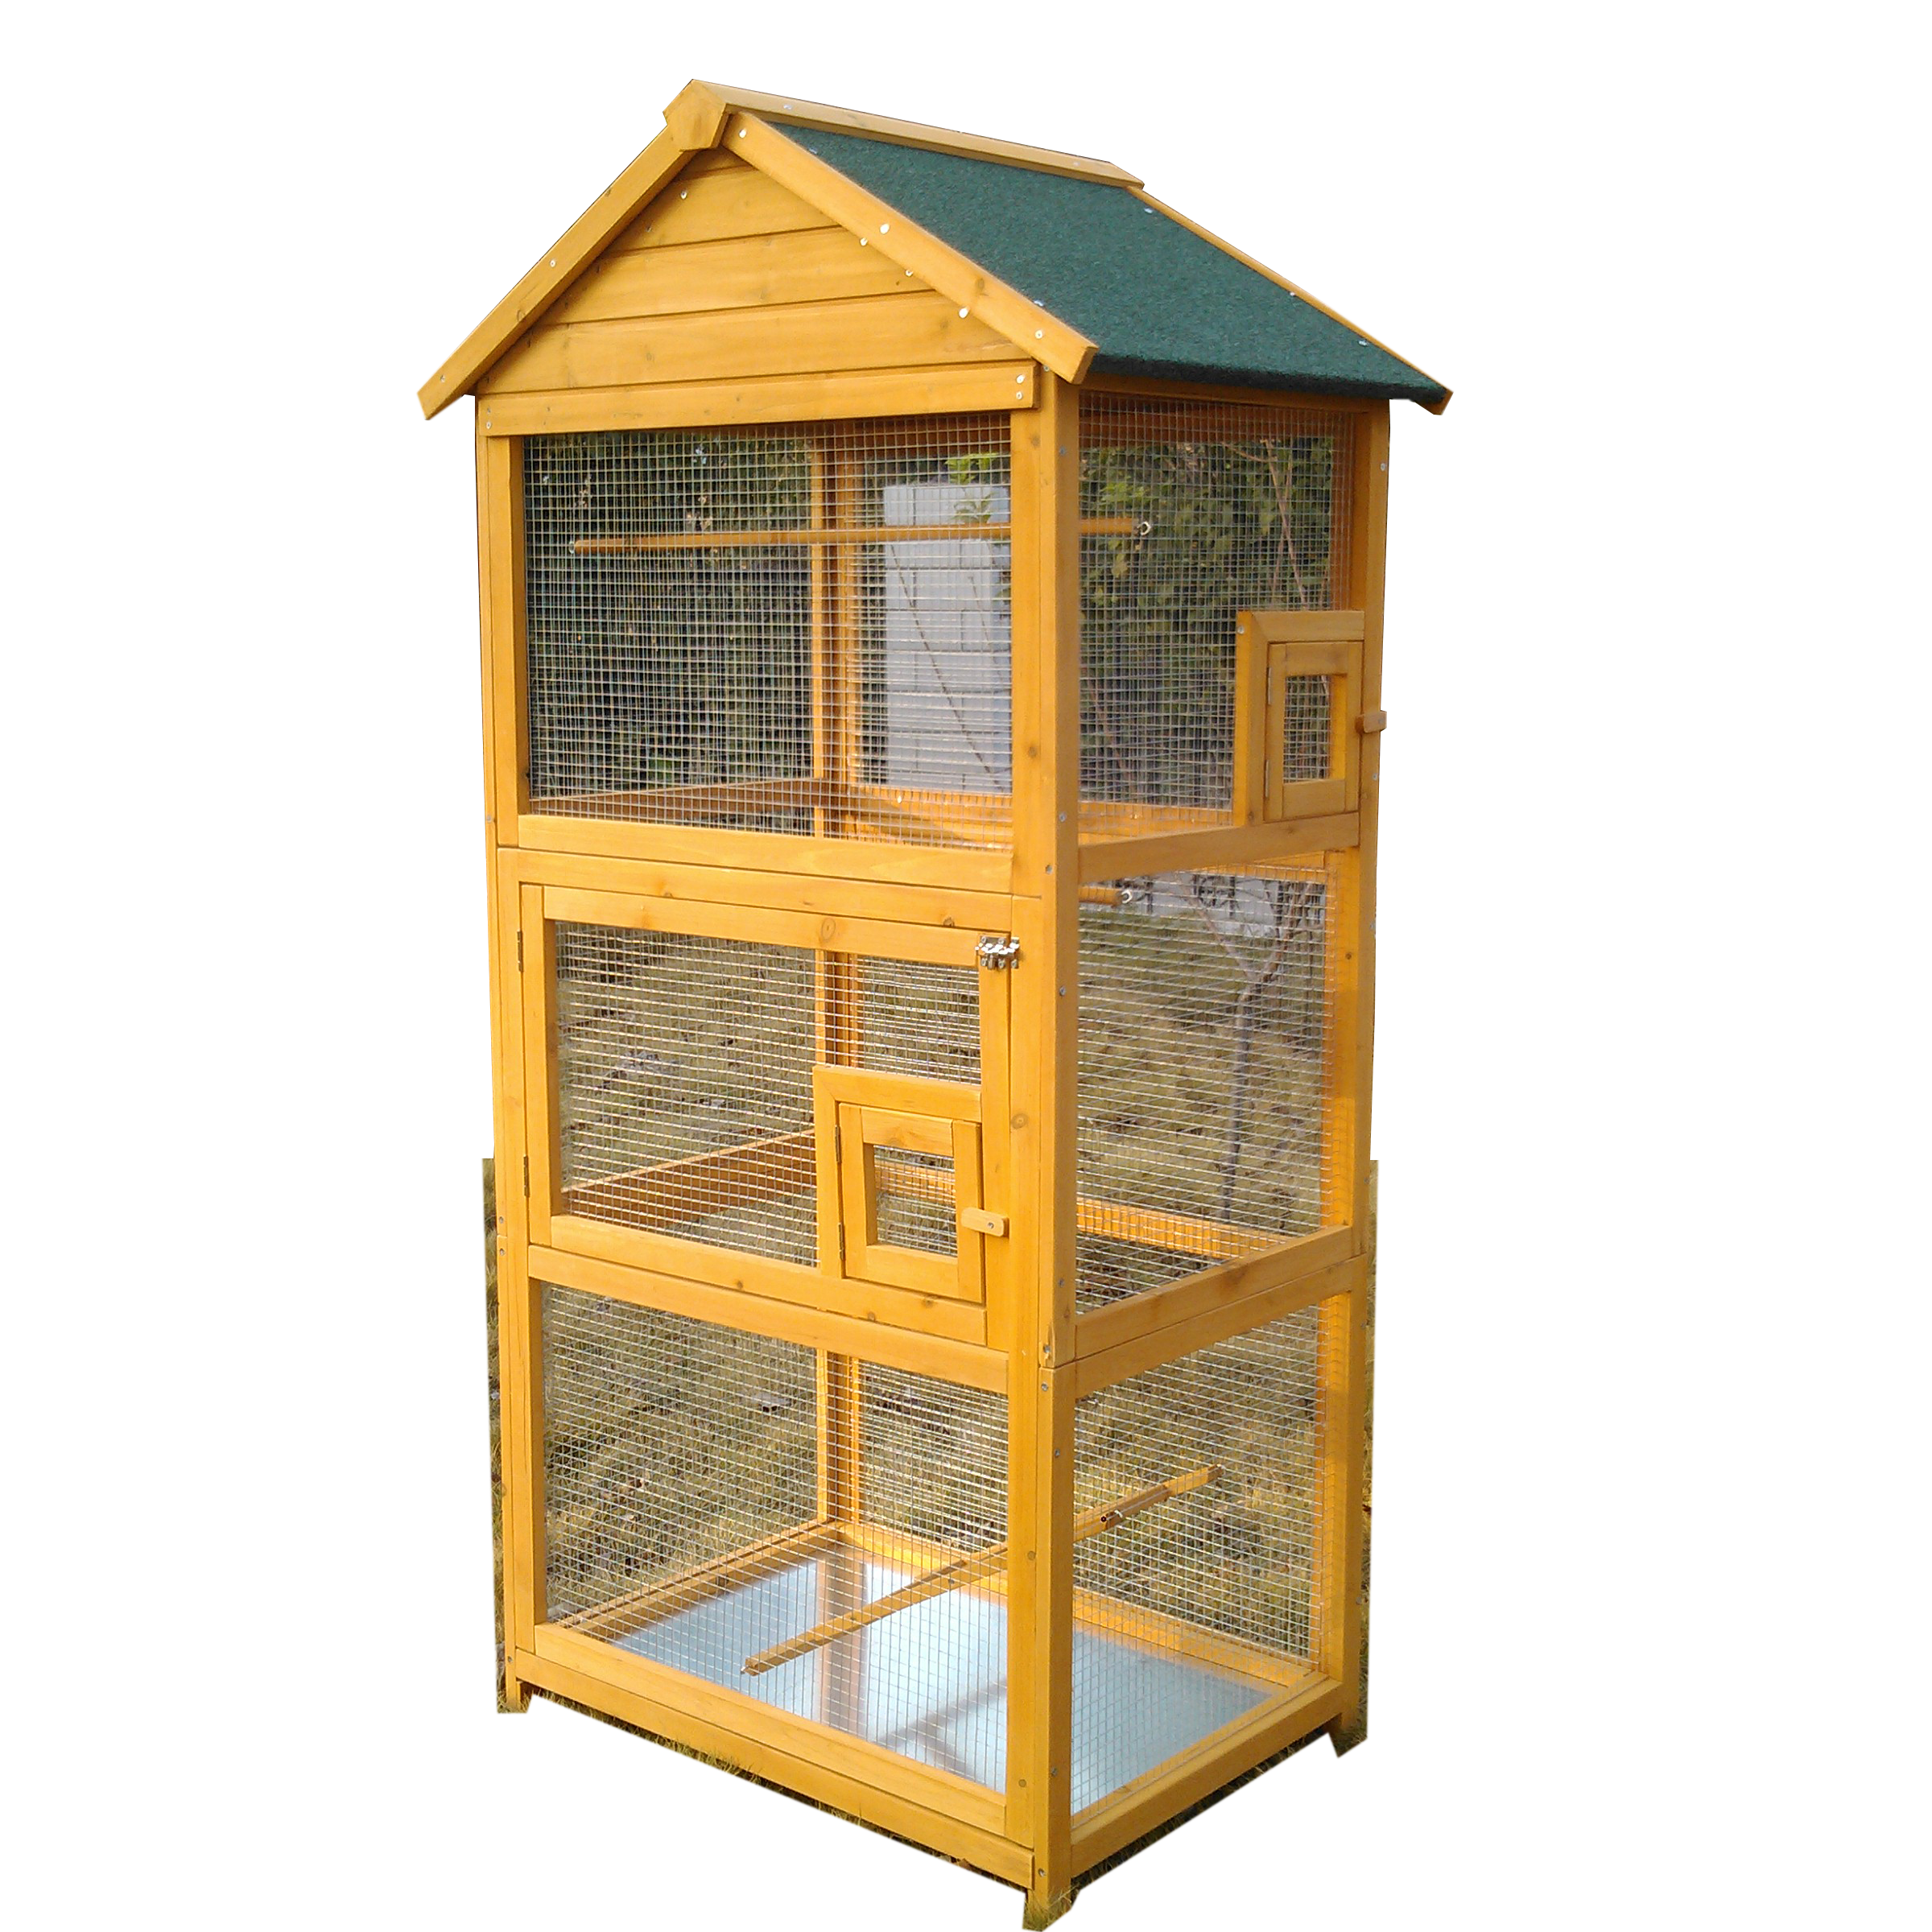 Large Wooden Art Wood Standing Bird Cage Pet Products Large Wooden Aviary Standing Vertical Play House with Bars for Parakeets